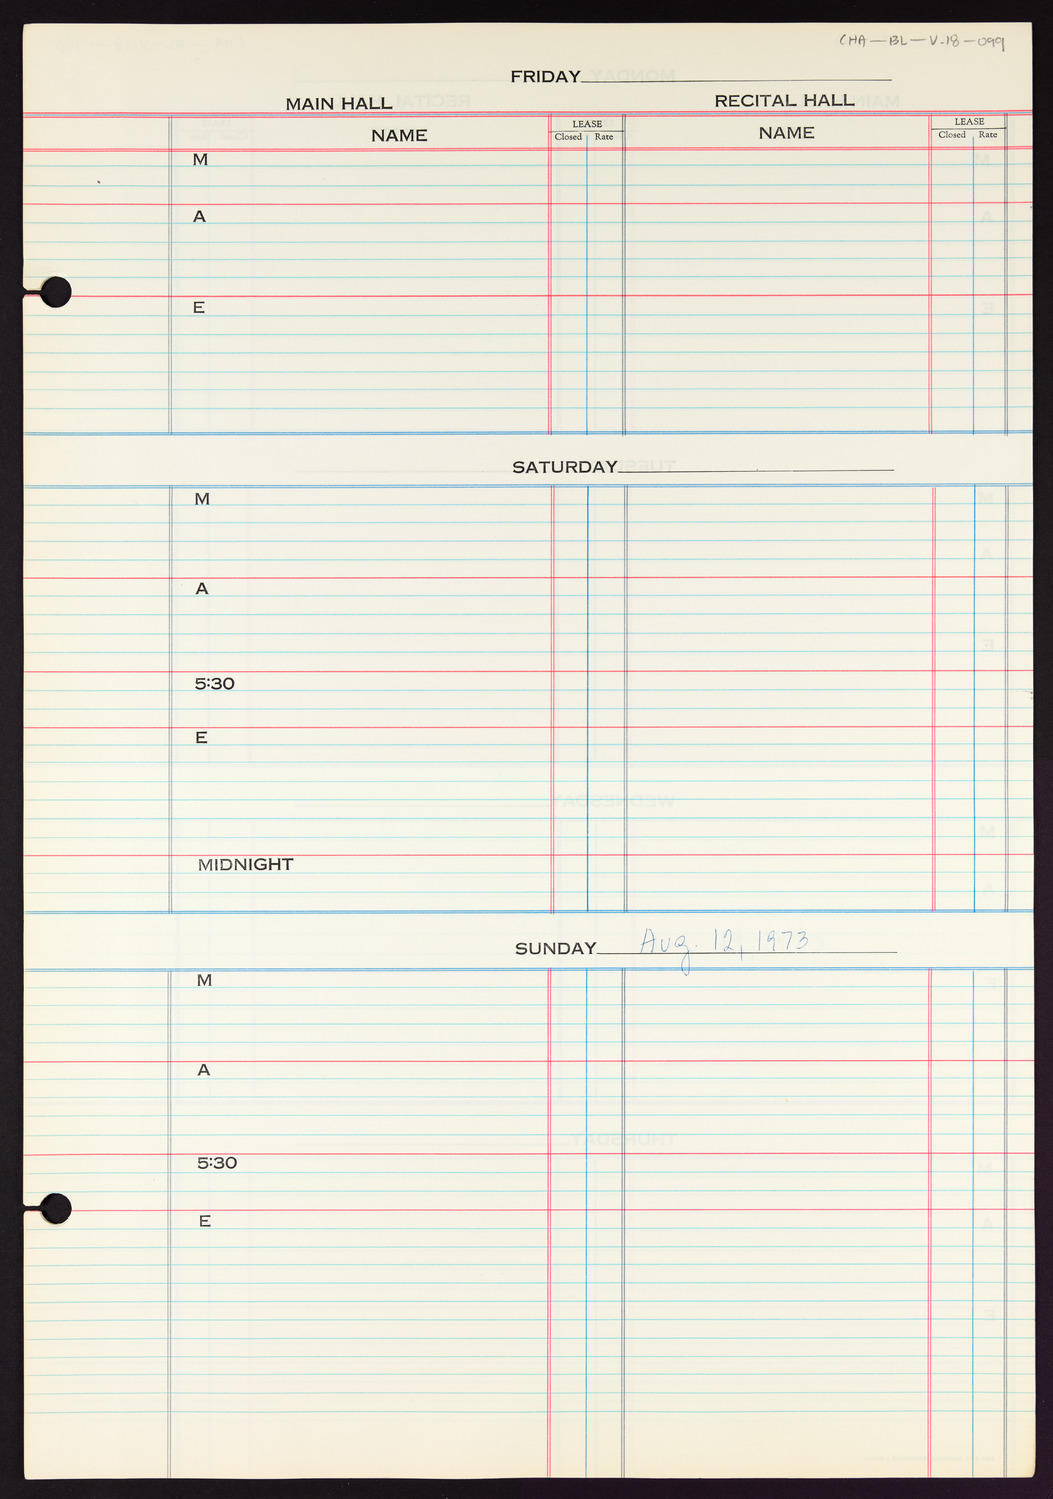 Carnegie Hall Booking Ledger, volume 18, page 99